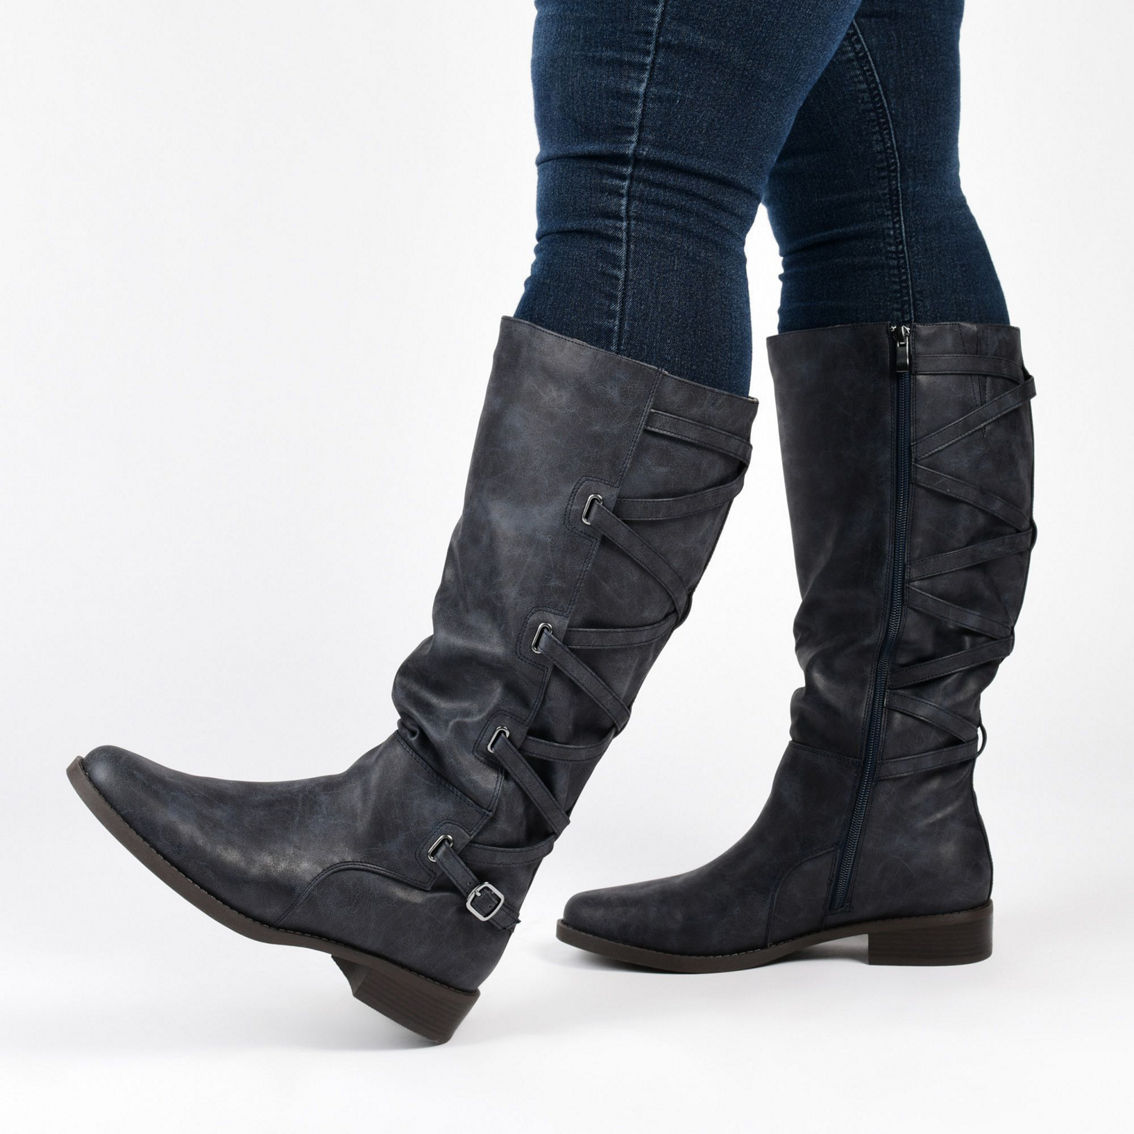 Journee Collection Women's Extra Wide Calf Carly Boot - Image 5 of 5